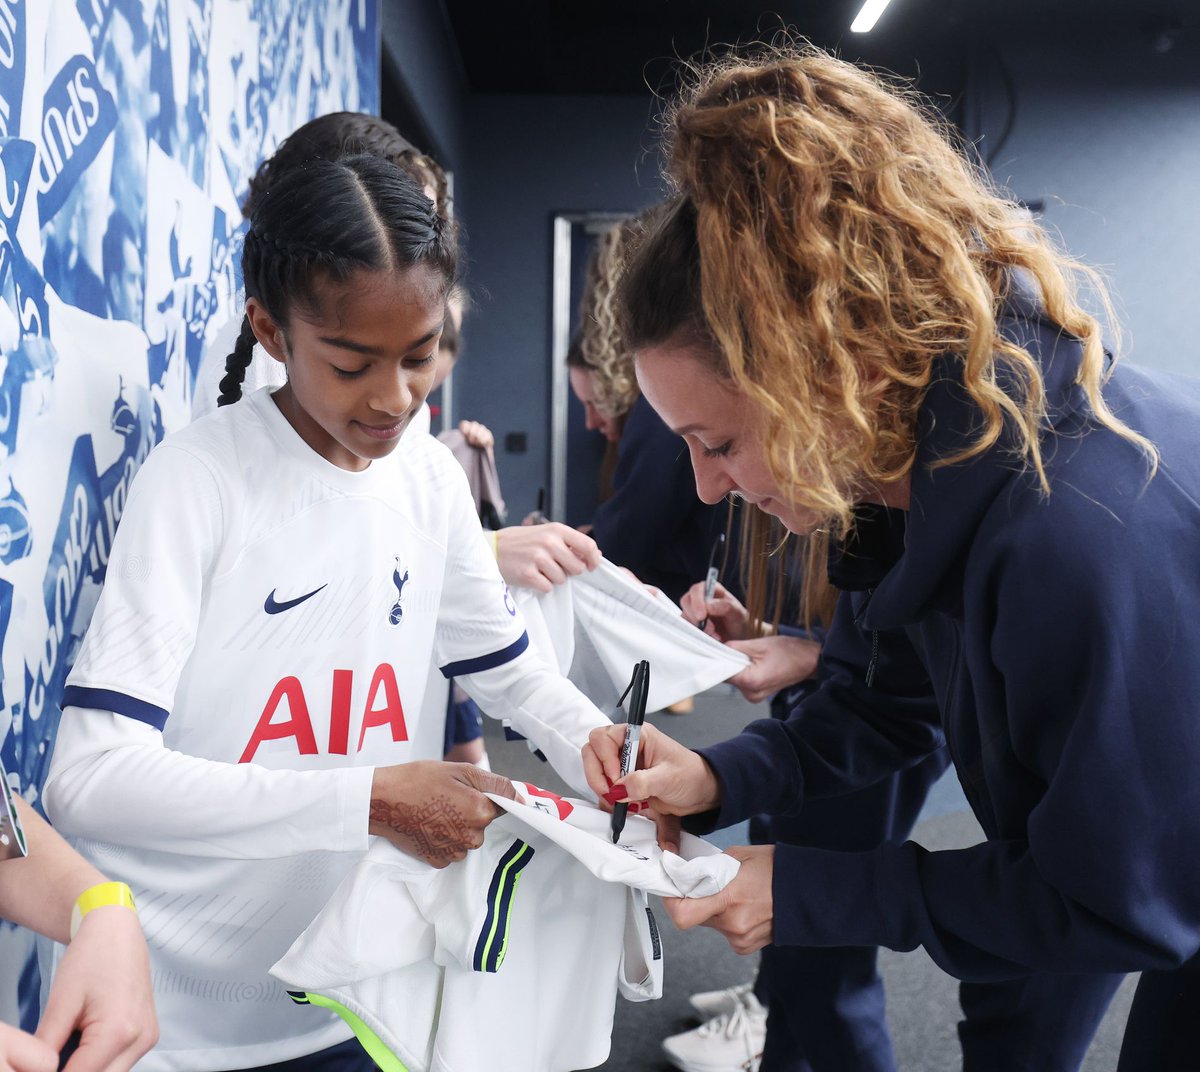 History makers! We'd just like to wish @SpursWomen all the best for their first-ever @AdobeWFACup final vs @ManUtdWomen at @wembleystadium today (Sunday 12 May, KO: 2:30pm). Thank you for inspiring the next gen of female footballers in #Haringey & beyond! #COYS #ToDareIsToDo ⚽